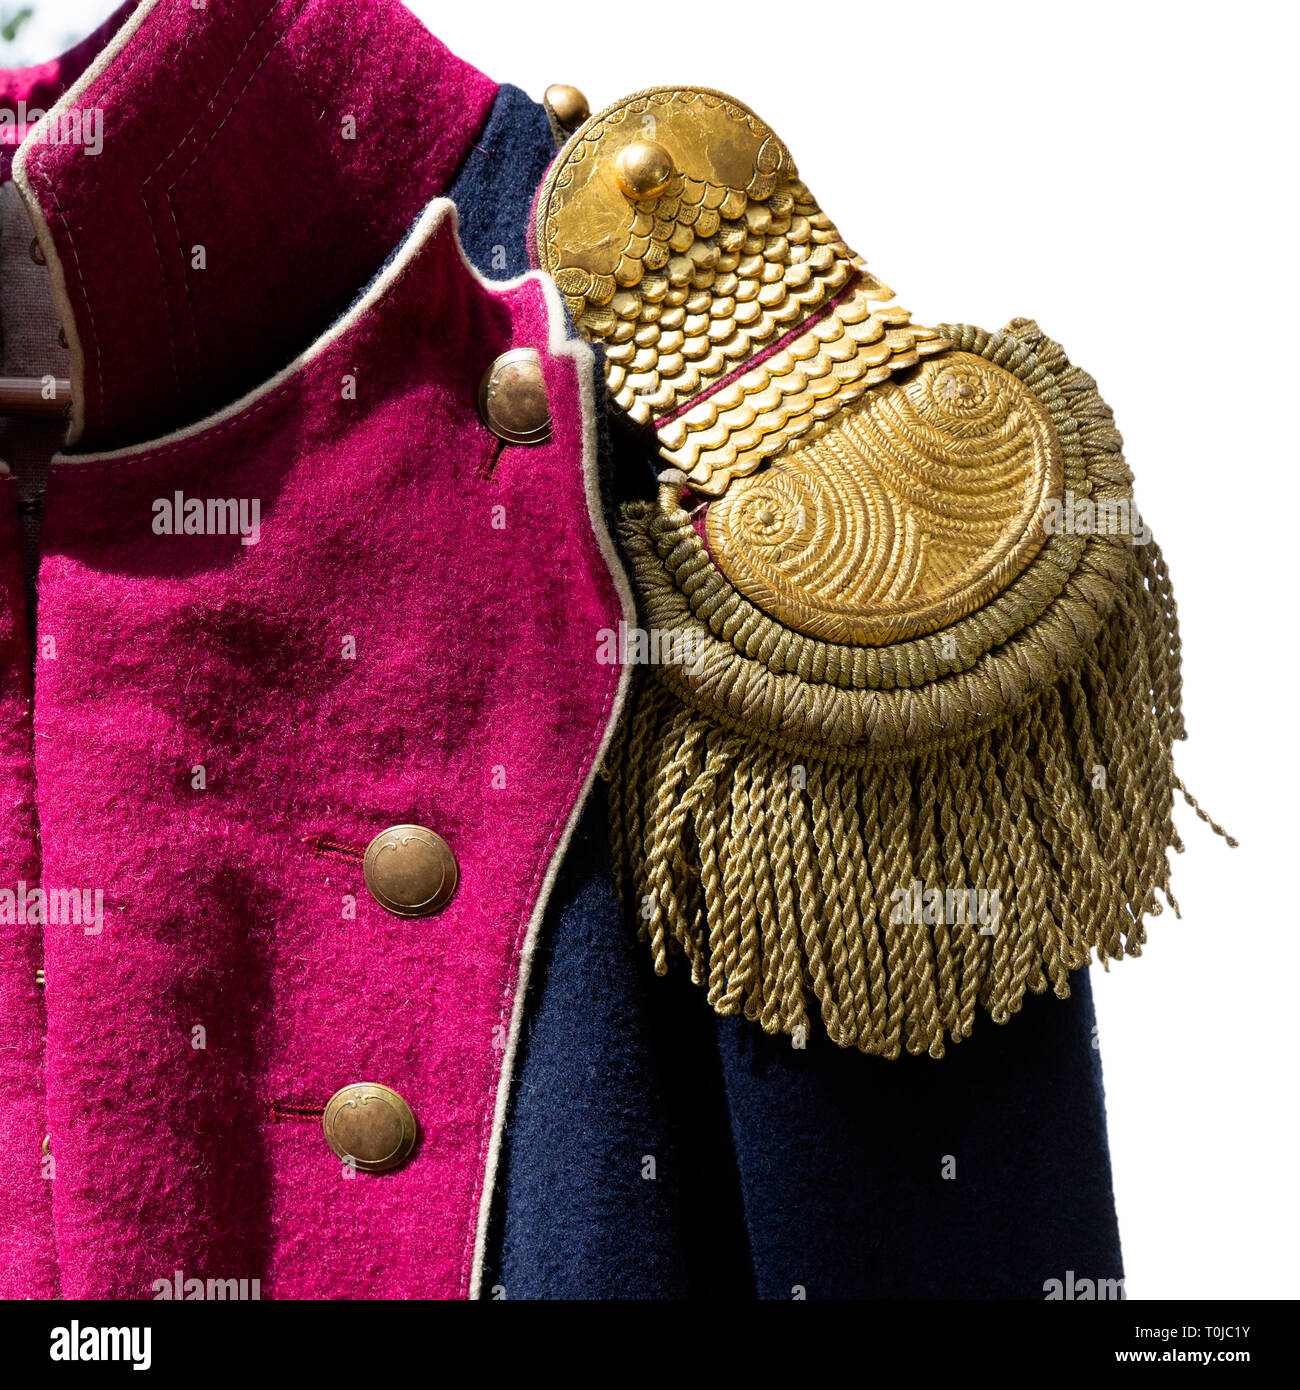 Details of a historic uniform of a French army of the Napoleon wars era. Closeup view of an epaulette. Isolated against the white background Stock Photo